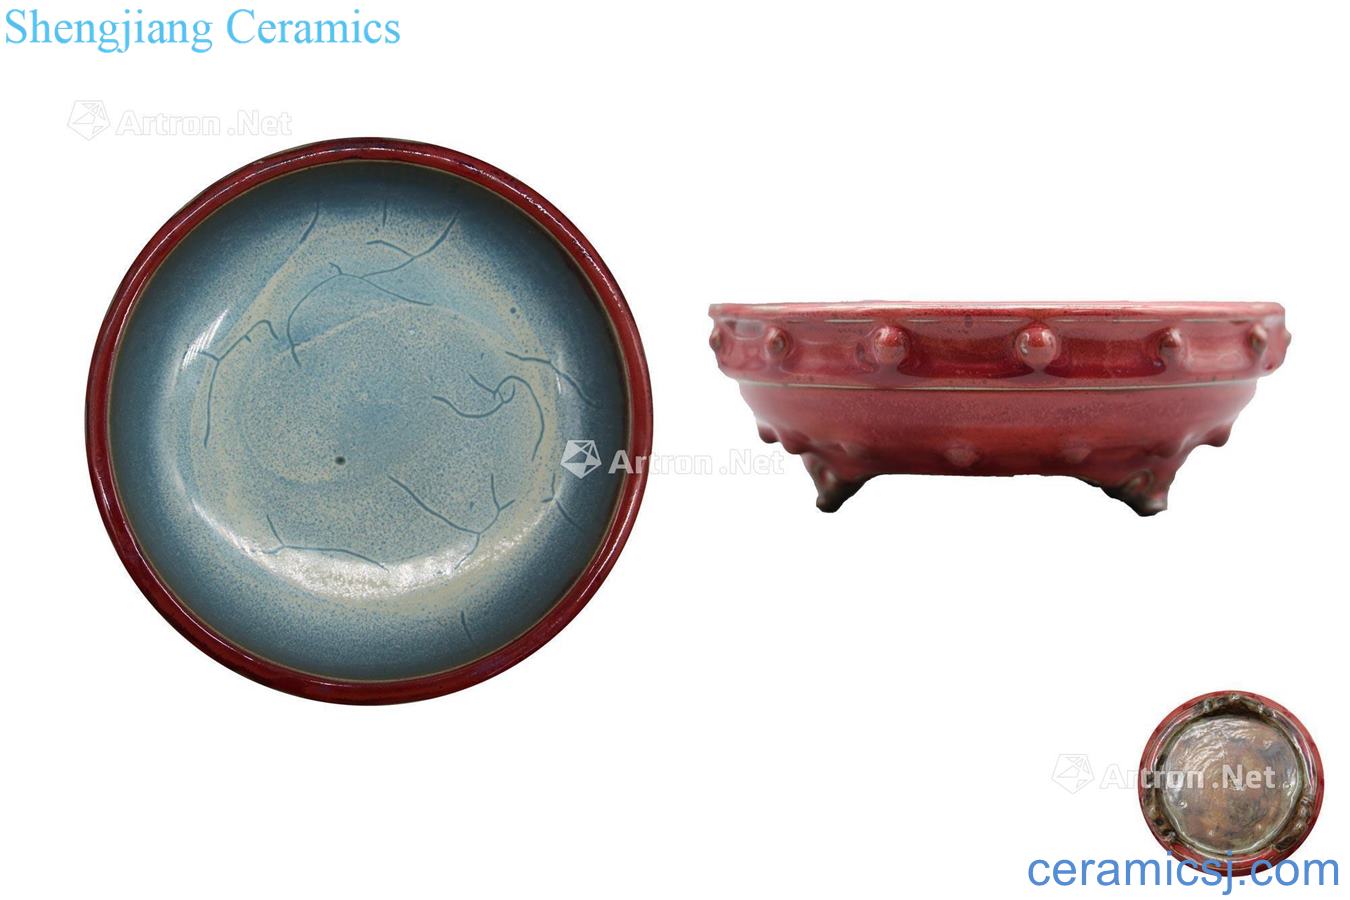 The northern song dynasty rose violet three masterpieces foot nail washing drum